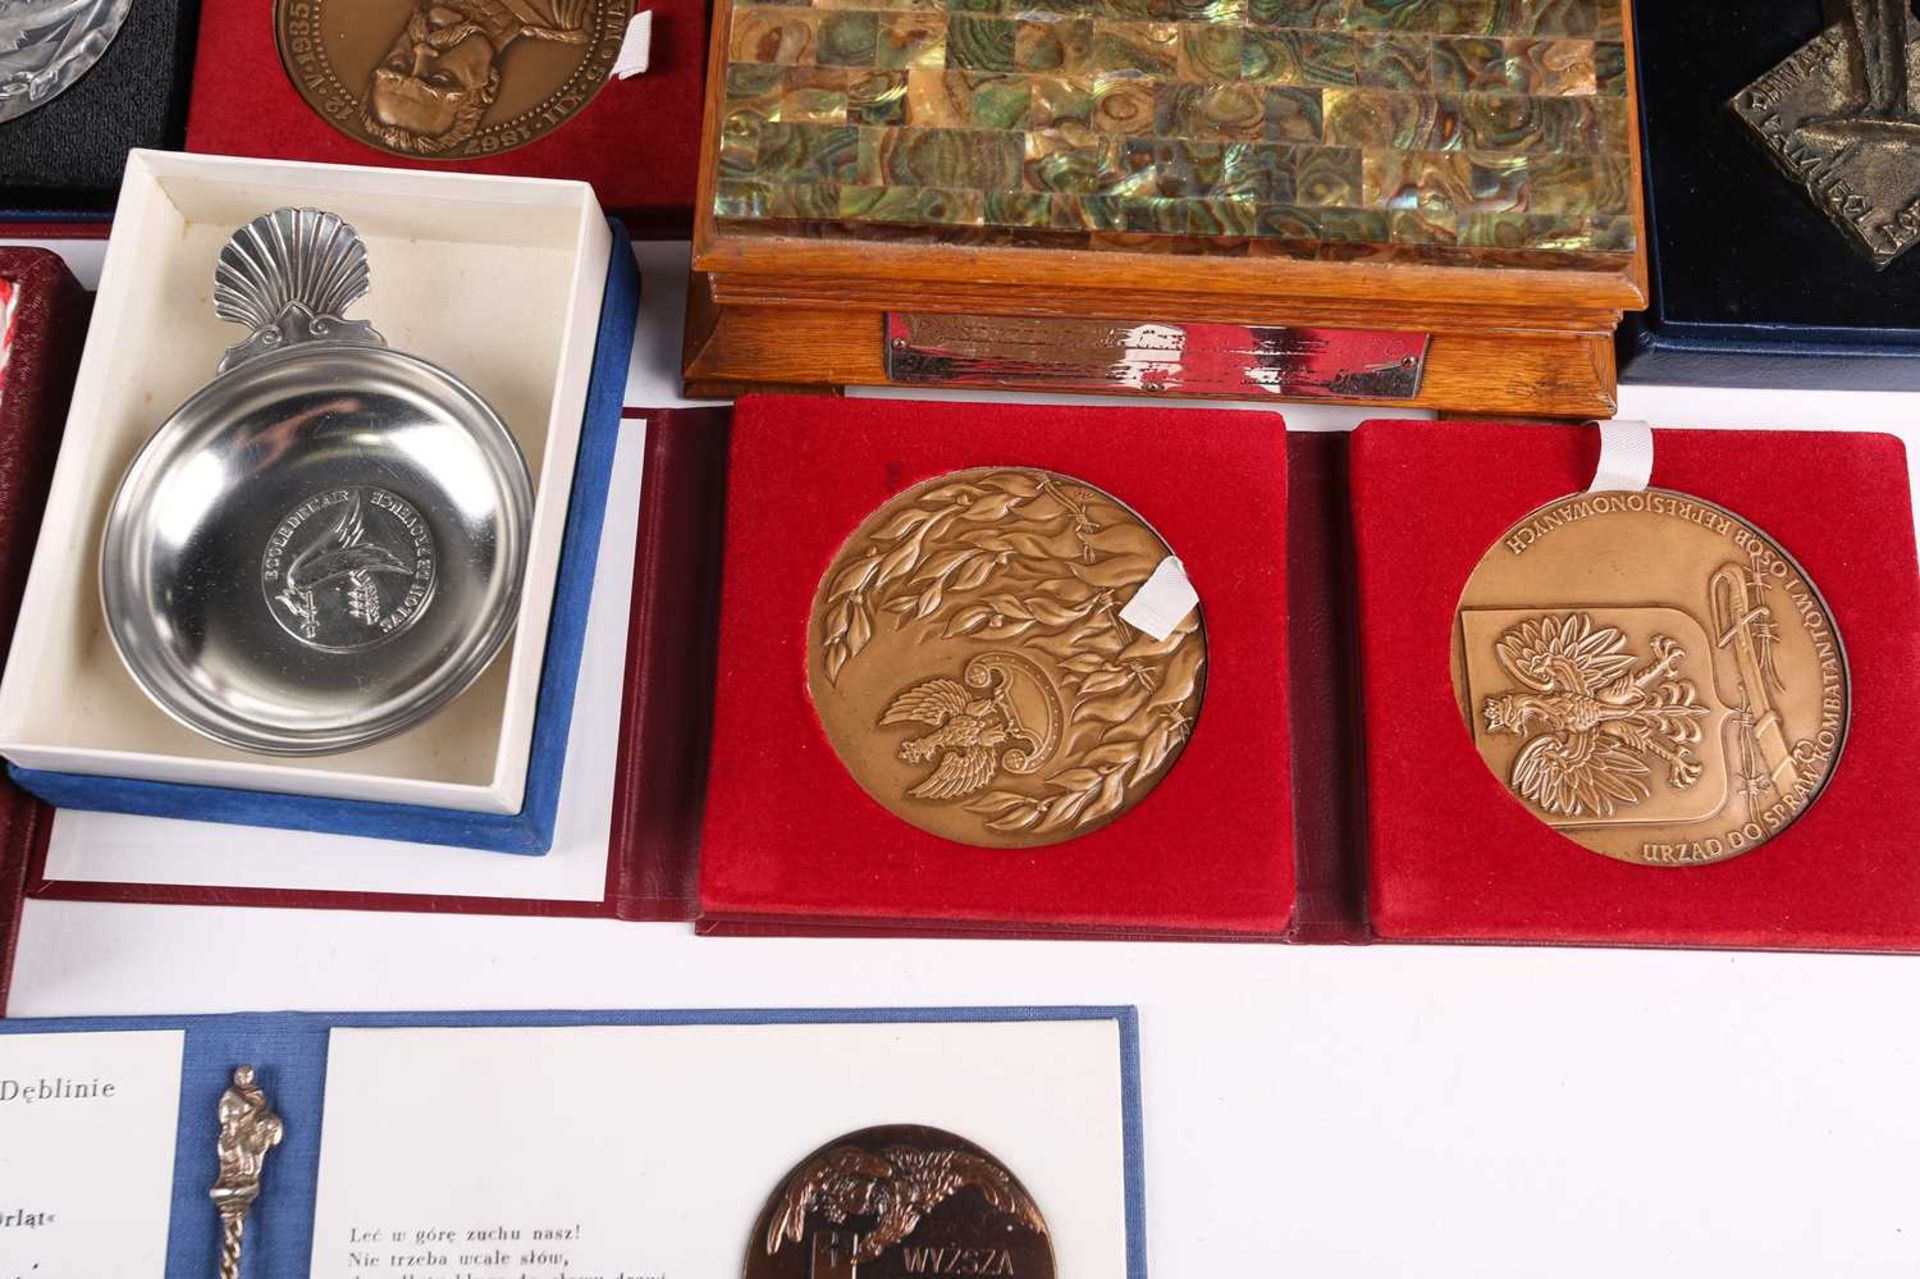 Of World War II, RAF/ Free Polish Air Force interest; a collection of medallions and awards to Air - Image 10 of 11